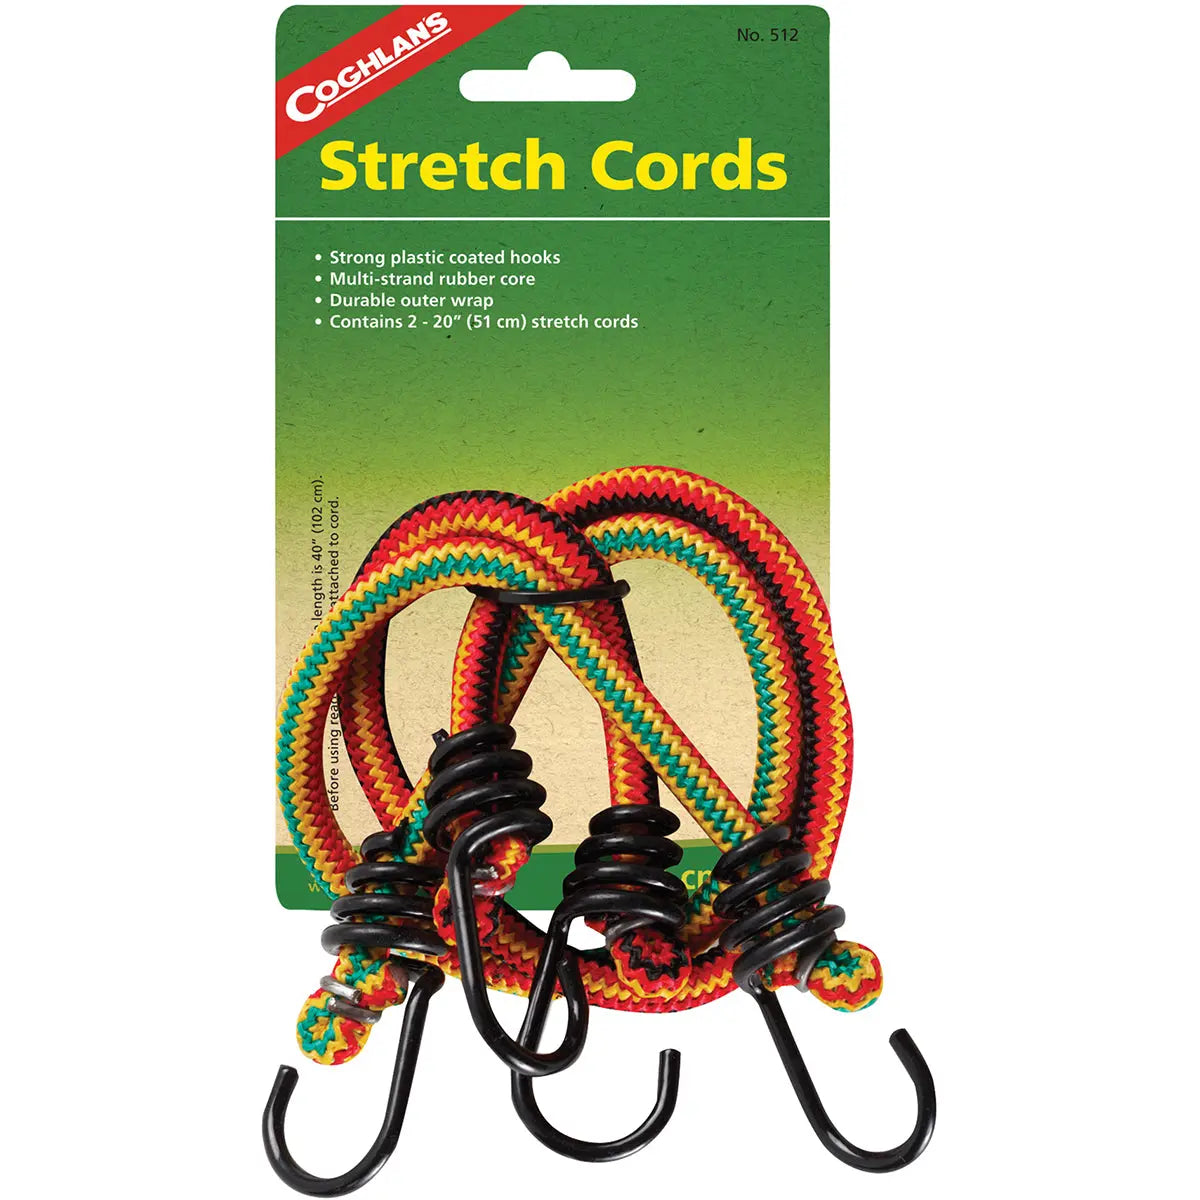 Coghlan's Stretch Cords 20" w/ Hooks (2 Pack), Bungee Rope Outdoor Camping Wrap Coghlan's